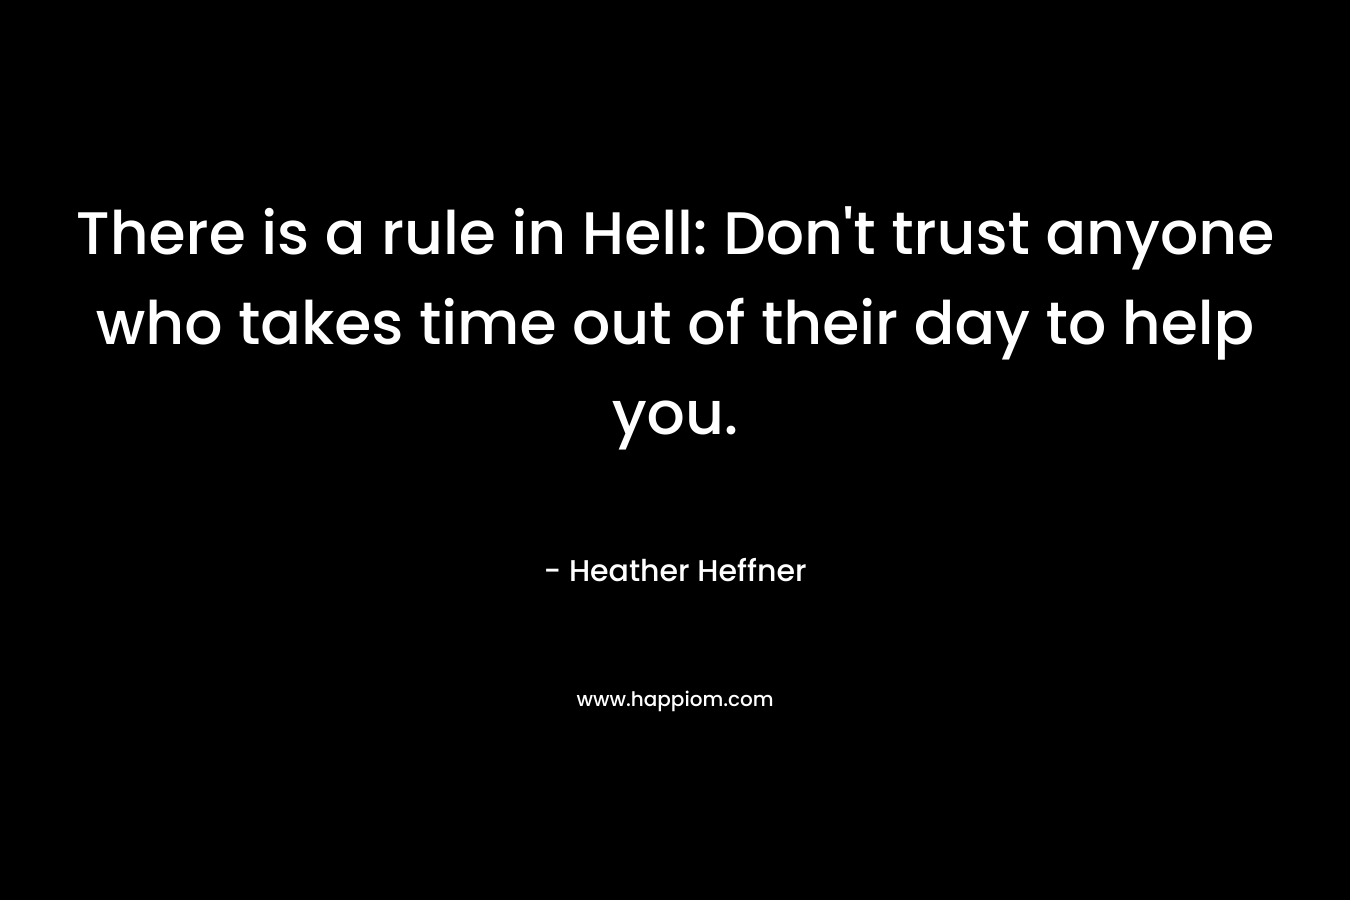 There is a rule in Hell: Don't trust anyone who takes time out of their day to help you.